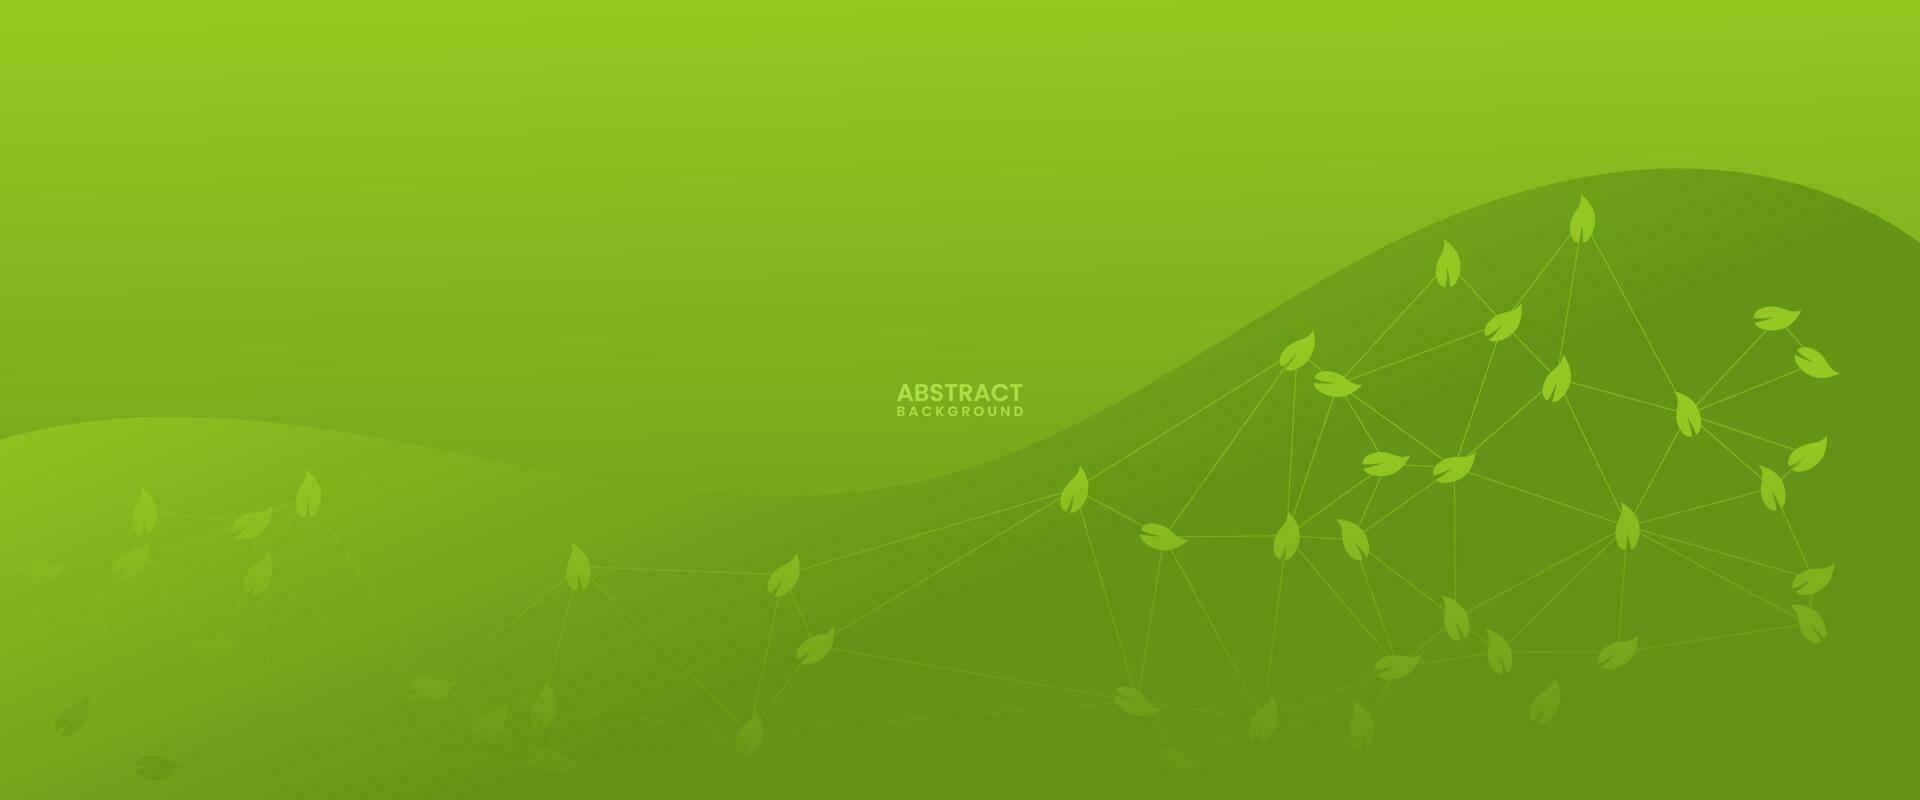 abstract green colorful geometric background with triangle shape pattern and leaf vector